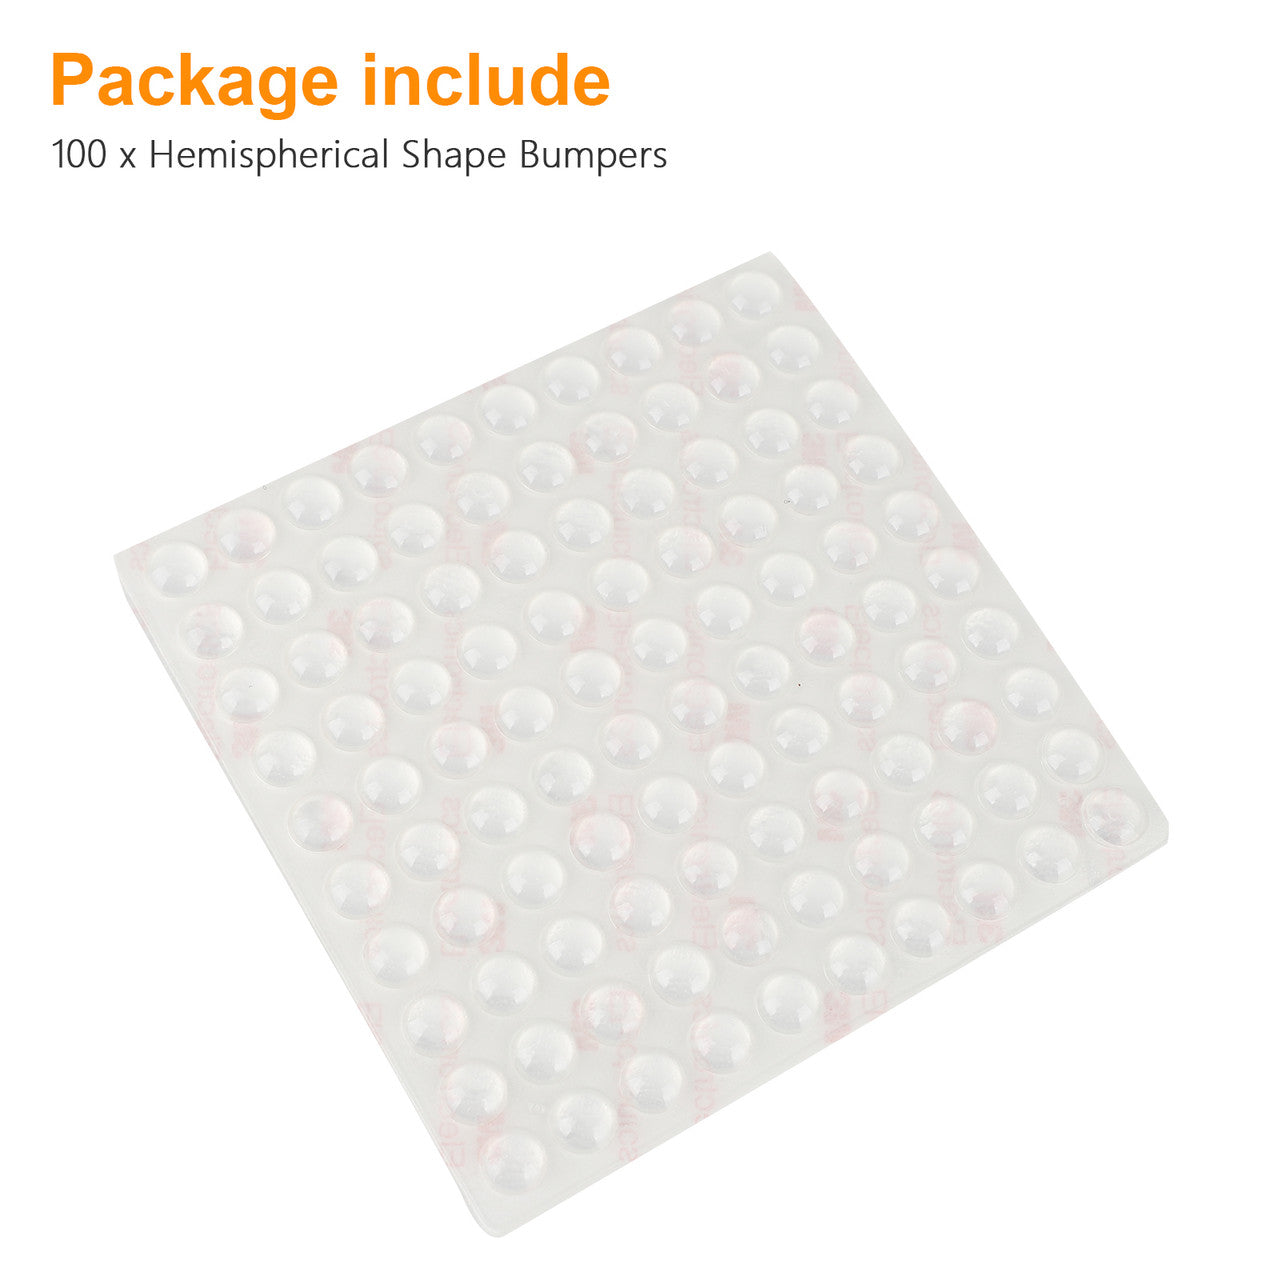 Cabinet Rubber Bumpers, Circular Dots Shaped Self Adhesive Bumper Pads Feet, Noise Dampening Buffer Pads, Sound Dampening Clear Cabinet Door Drawer Bumpers, Picture Frames, Cutting Boards 100 PCS